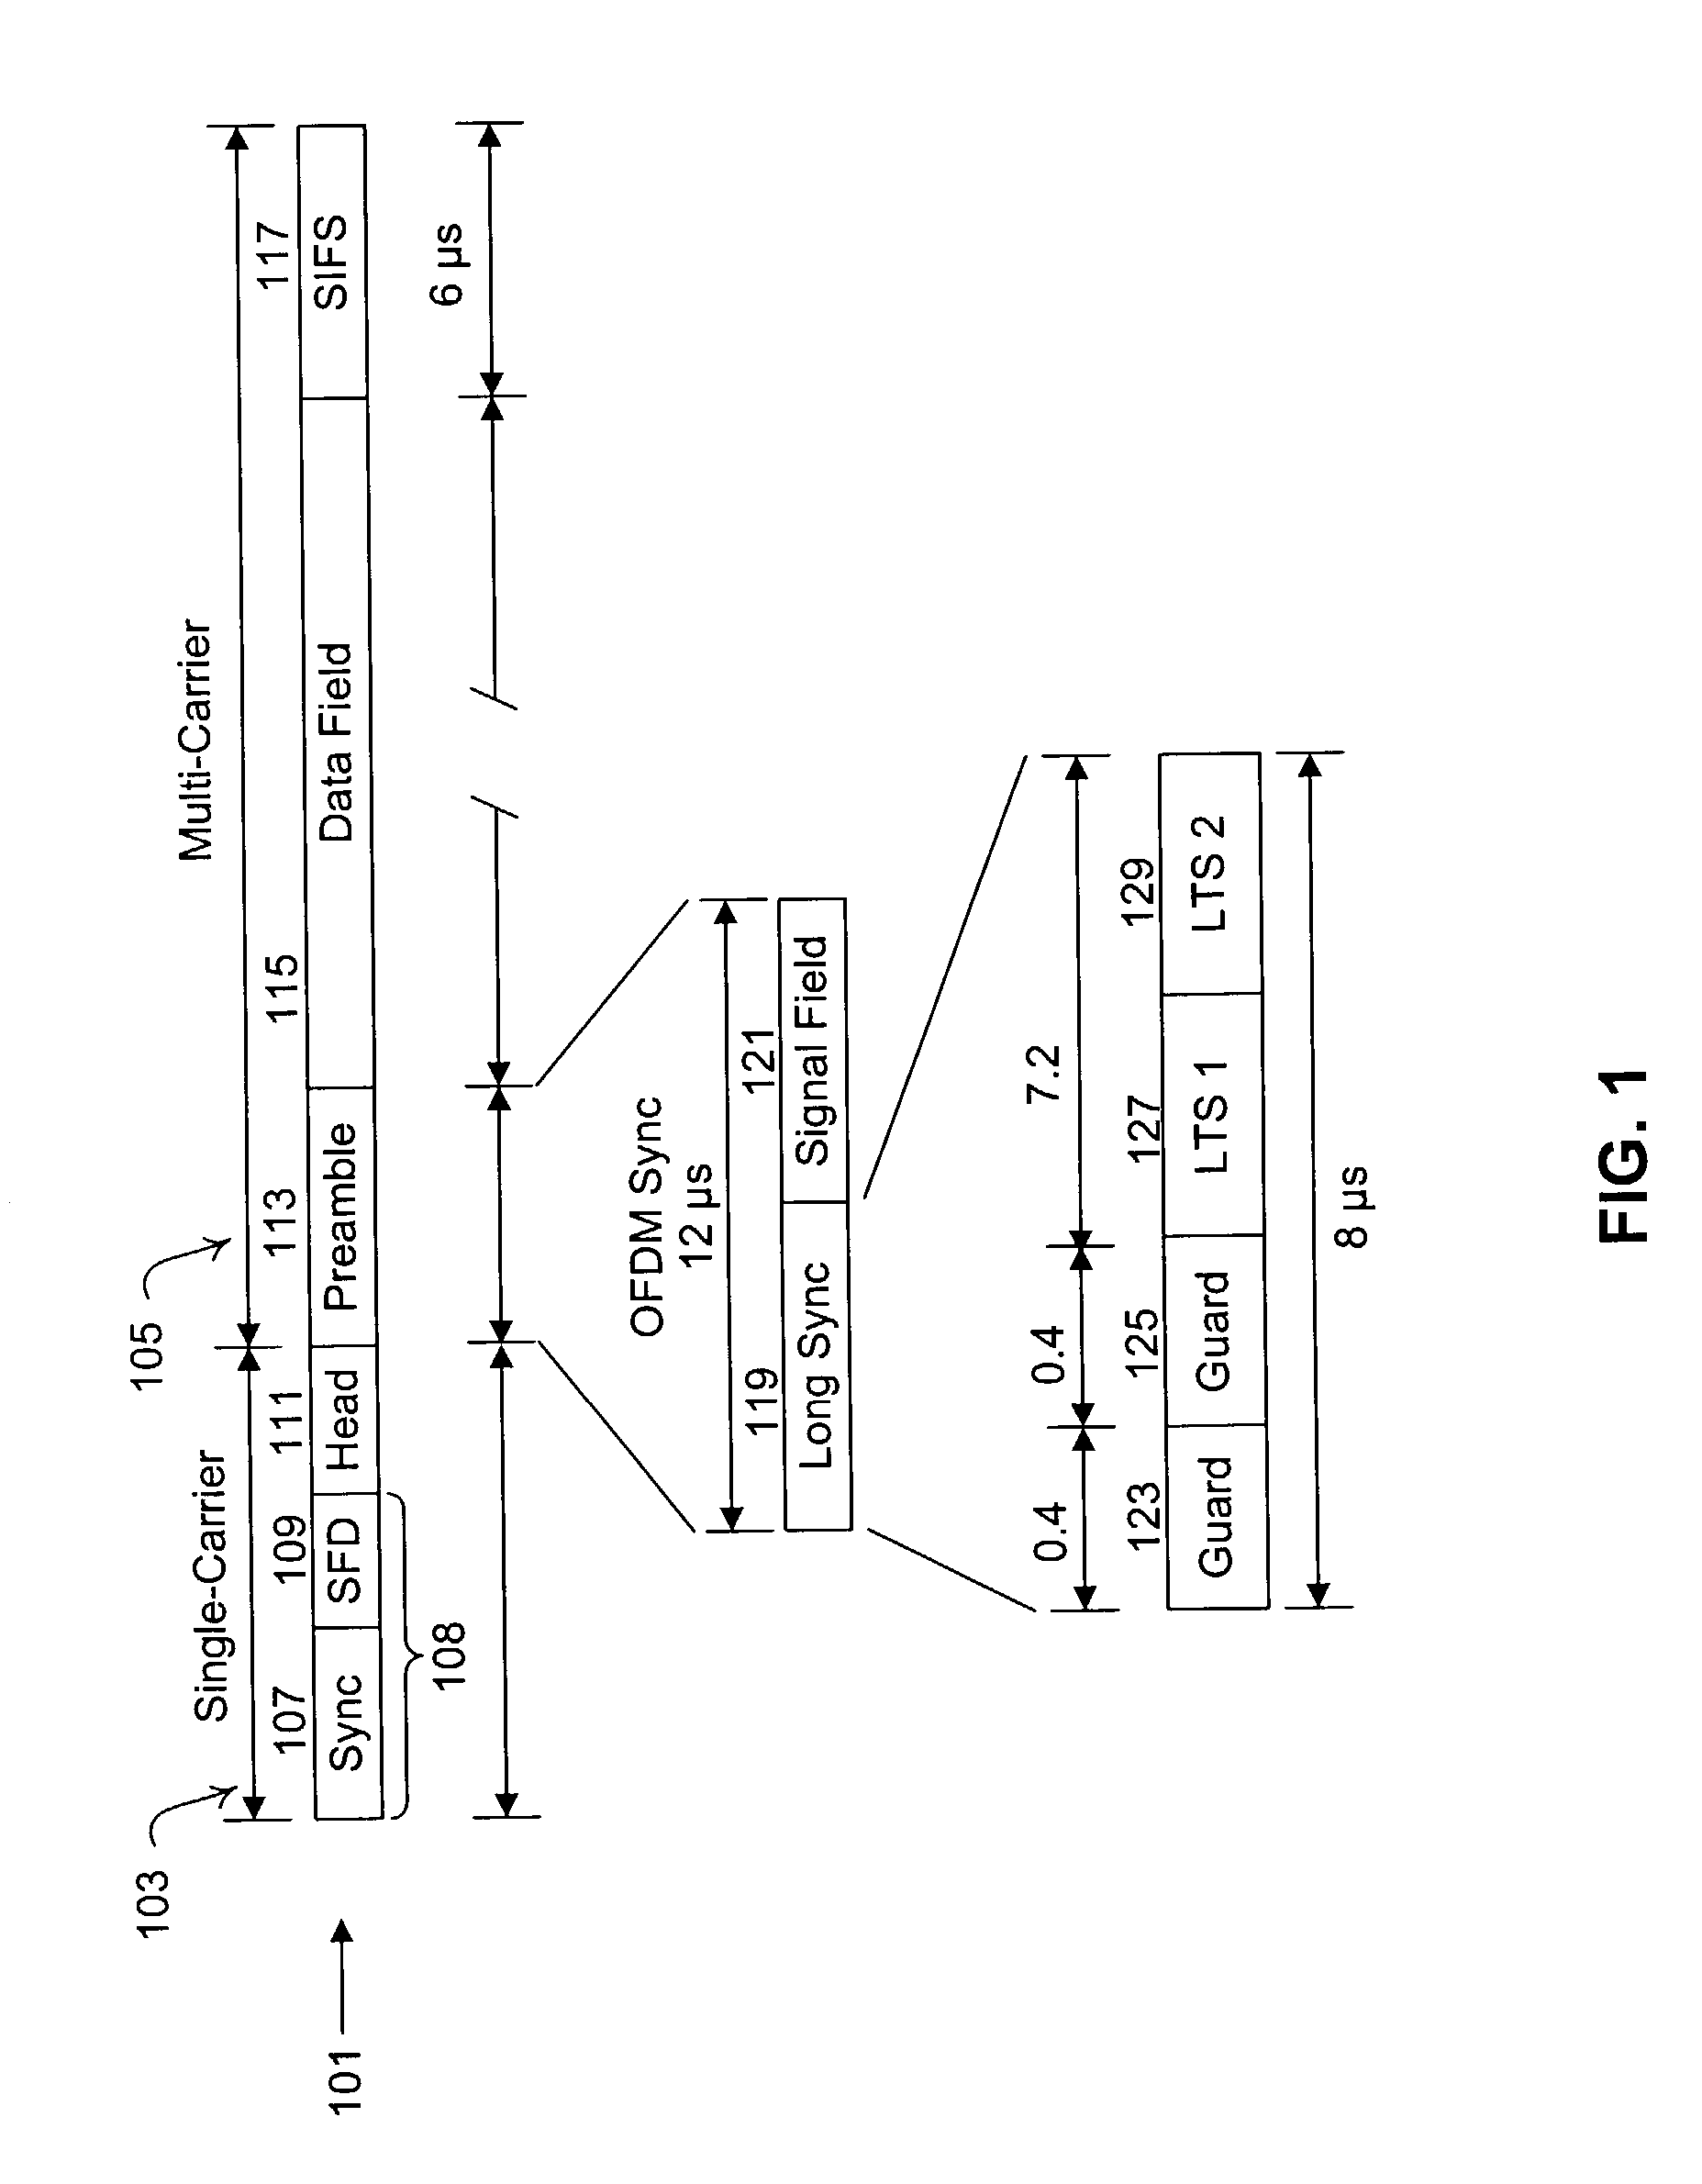 Sample rate change between single-carrier and multi-carrier waveforms